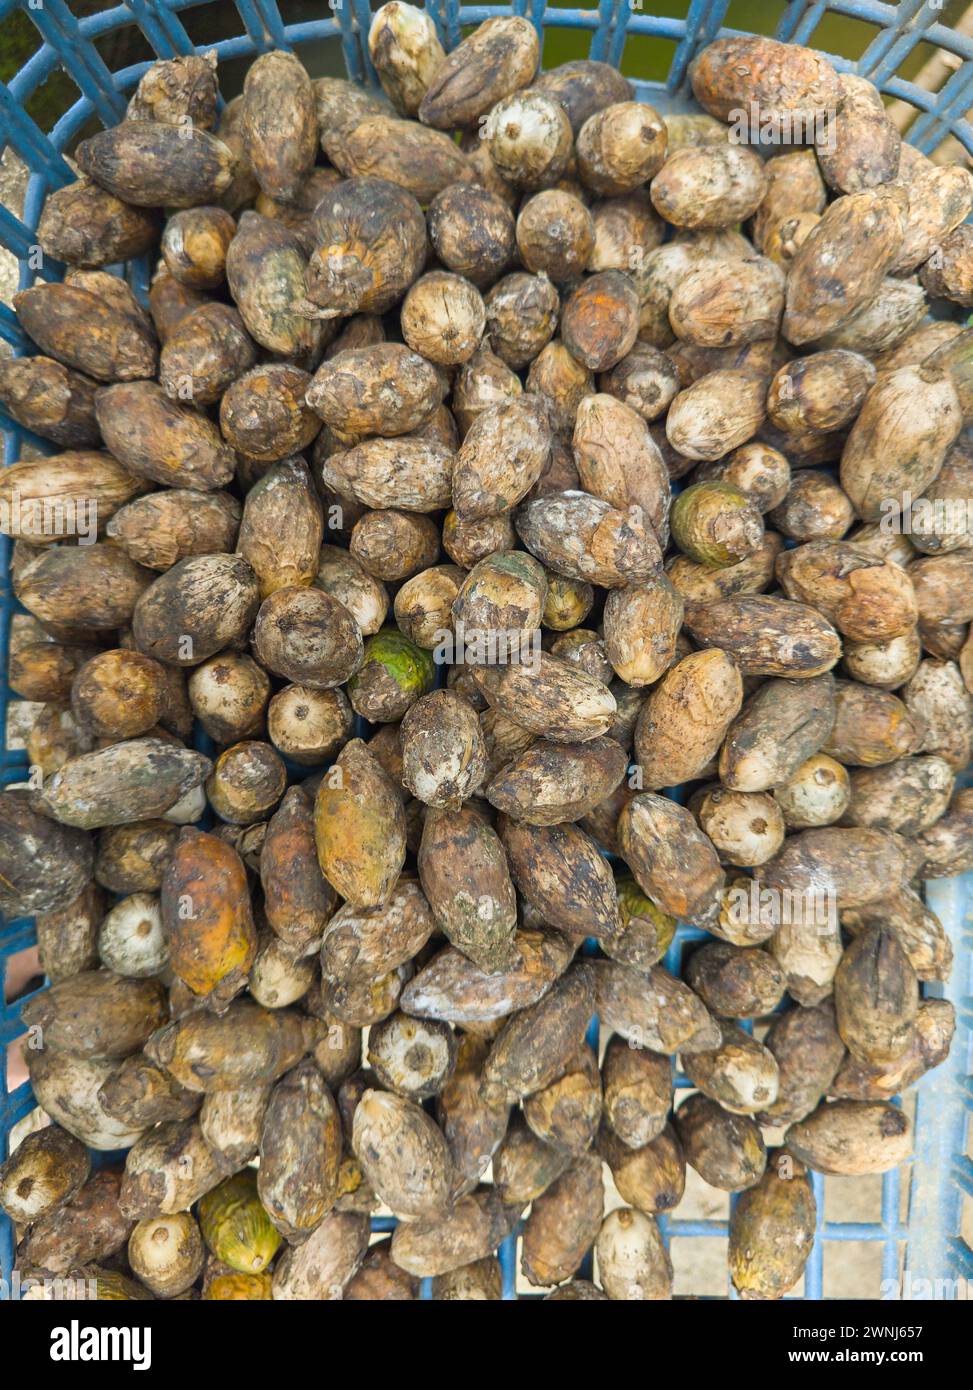 sun drying areca nuts, fruit of the areca palm, areca nut palm or betel palm, close-up of tropical and commercially important fruits Stock Photo